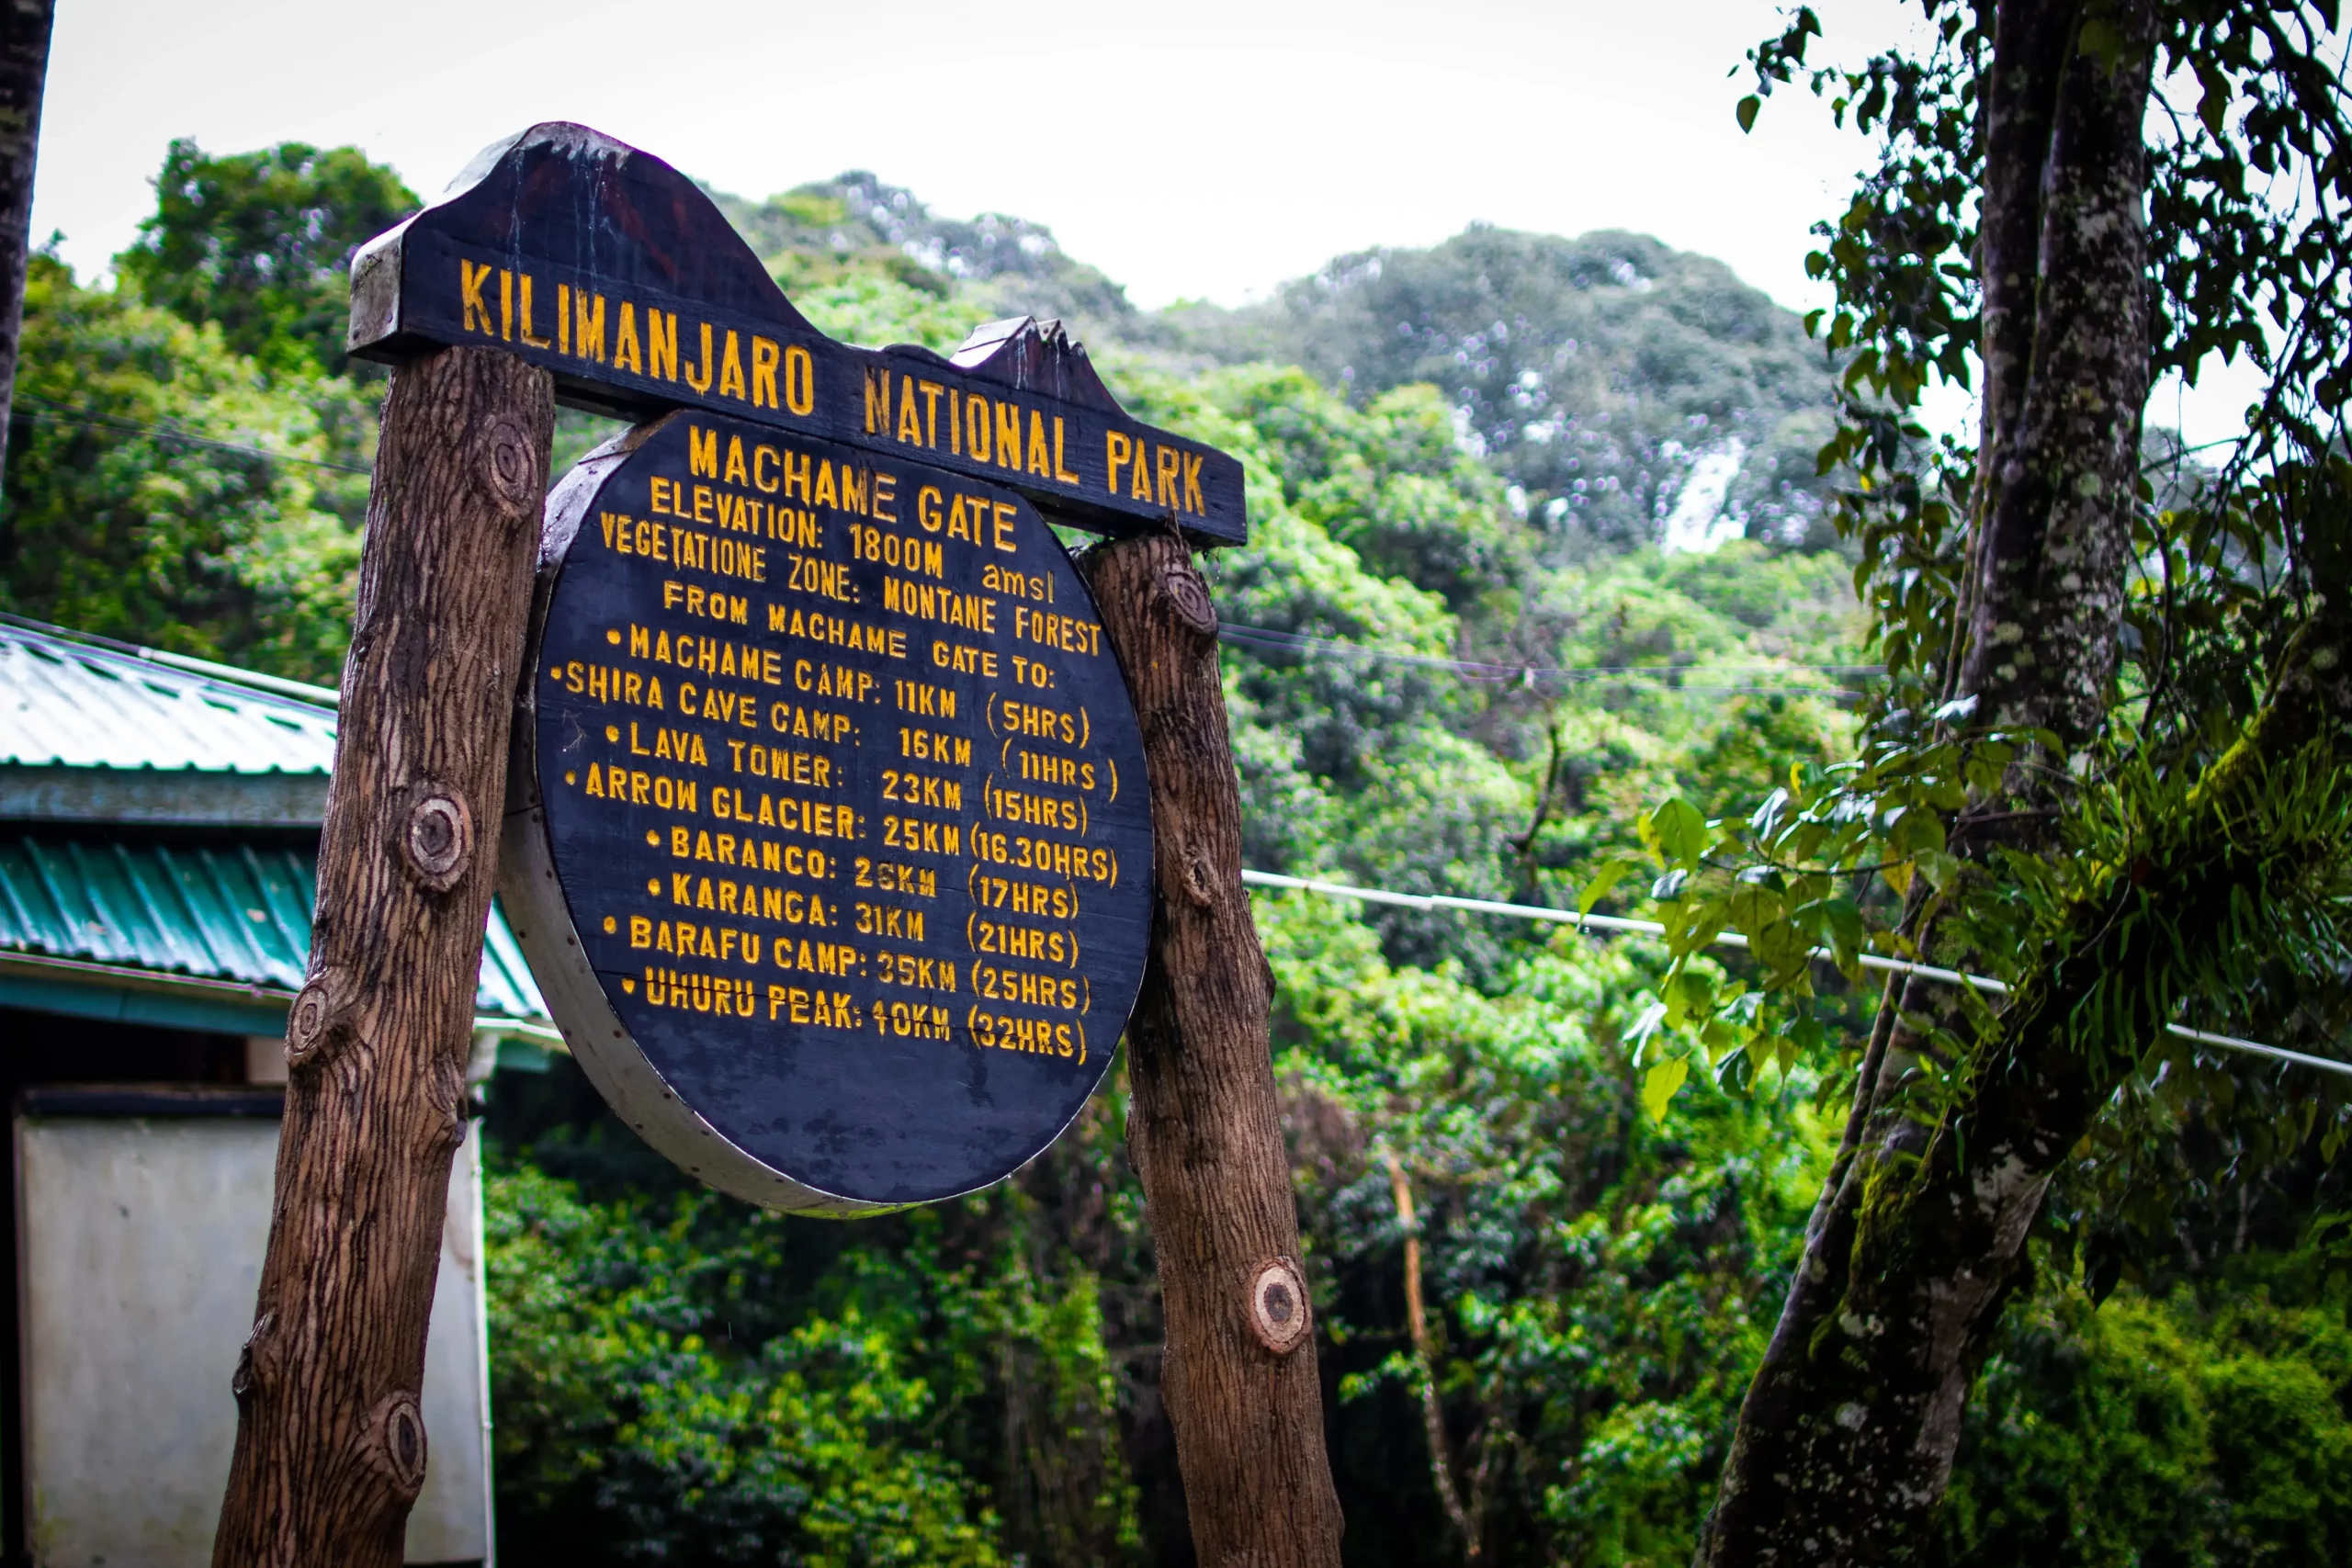 Machame route itinerary for 6days